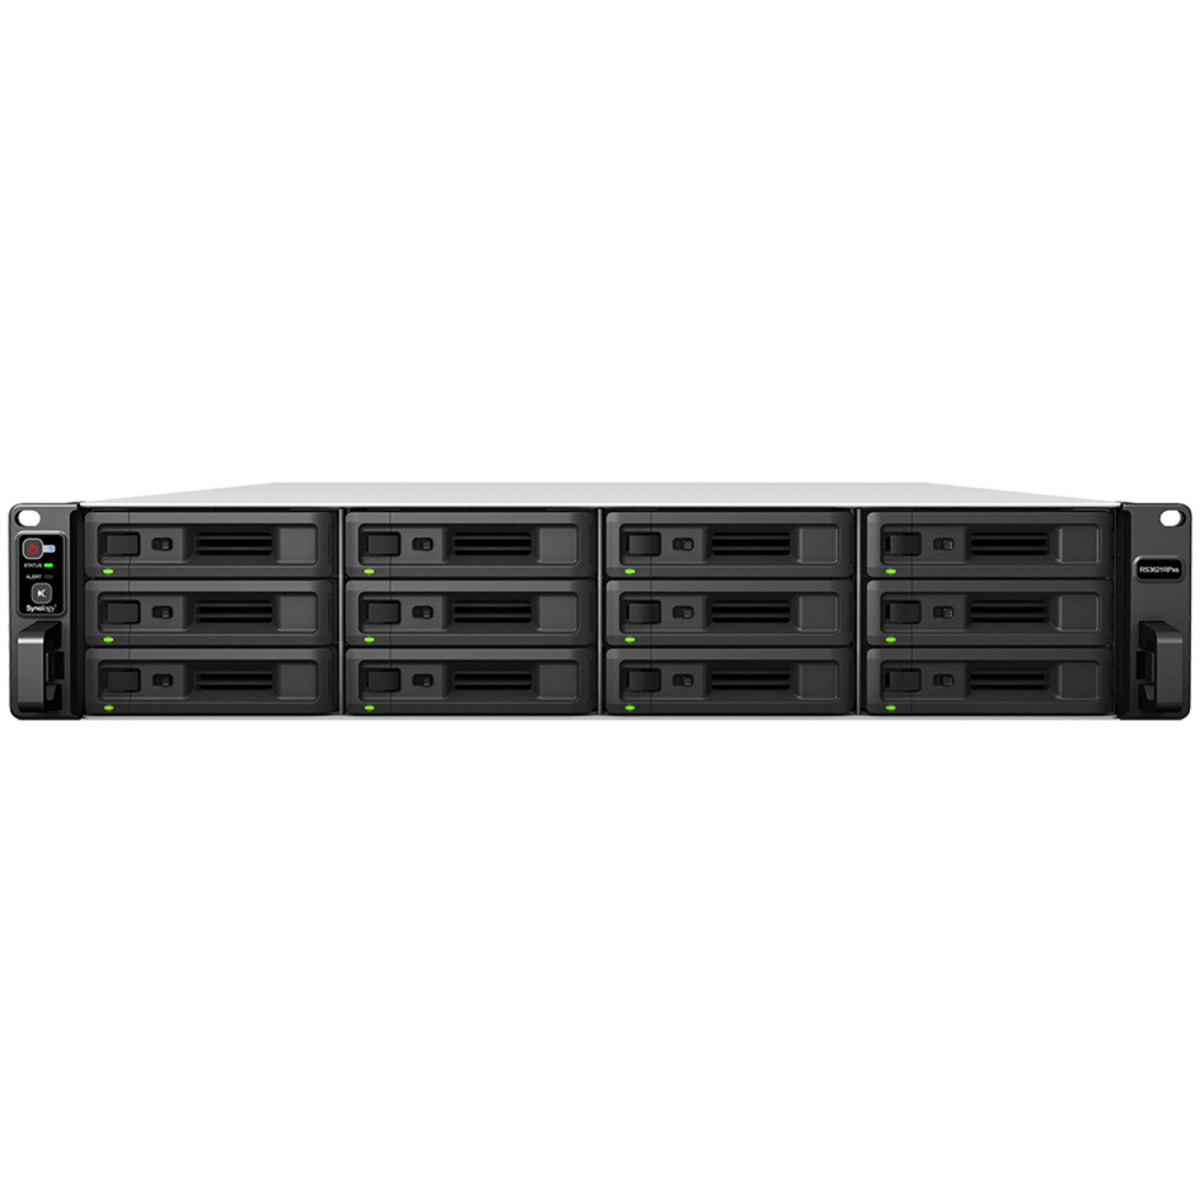 buy $14707 Synology RackStation RS3621RPxs 96tb RackMount NAS - Network Attached Storage Device 12x8000gb Samsung 870 QVO MZ-77Q8T0 2.5 SATA 6Gb/s SSD CONSUMER Class Drives Installed - Burn-In Tested - nas headquarters buy network attached storage server device das new raid-5 free shipping usa christmas new year holiday sale RackStation RS3621RPxs